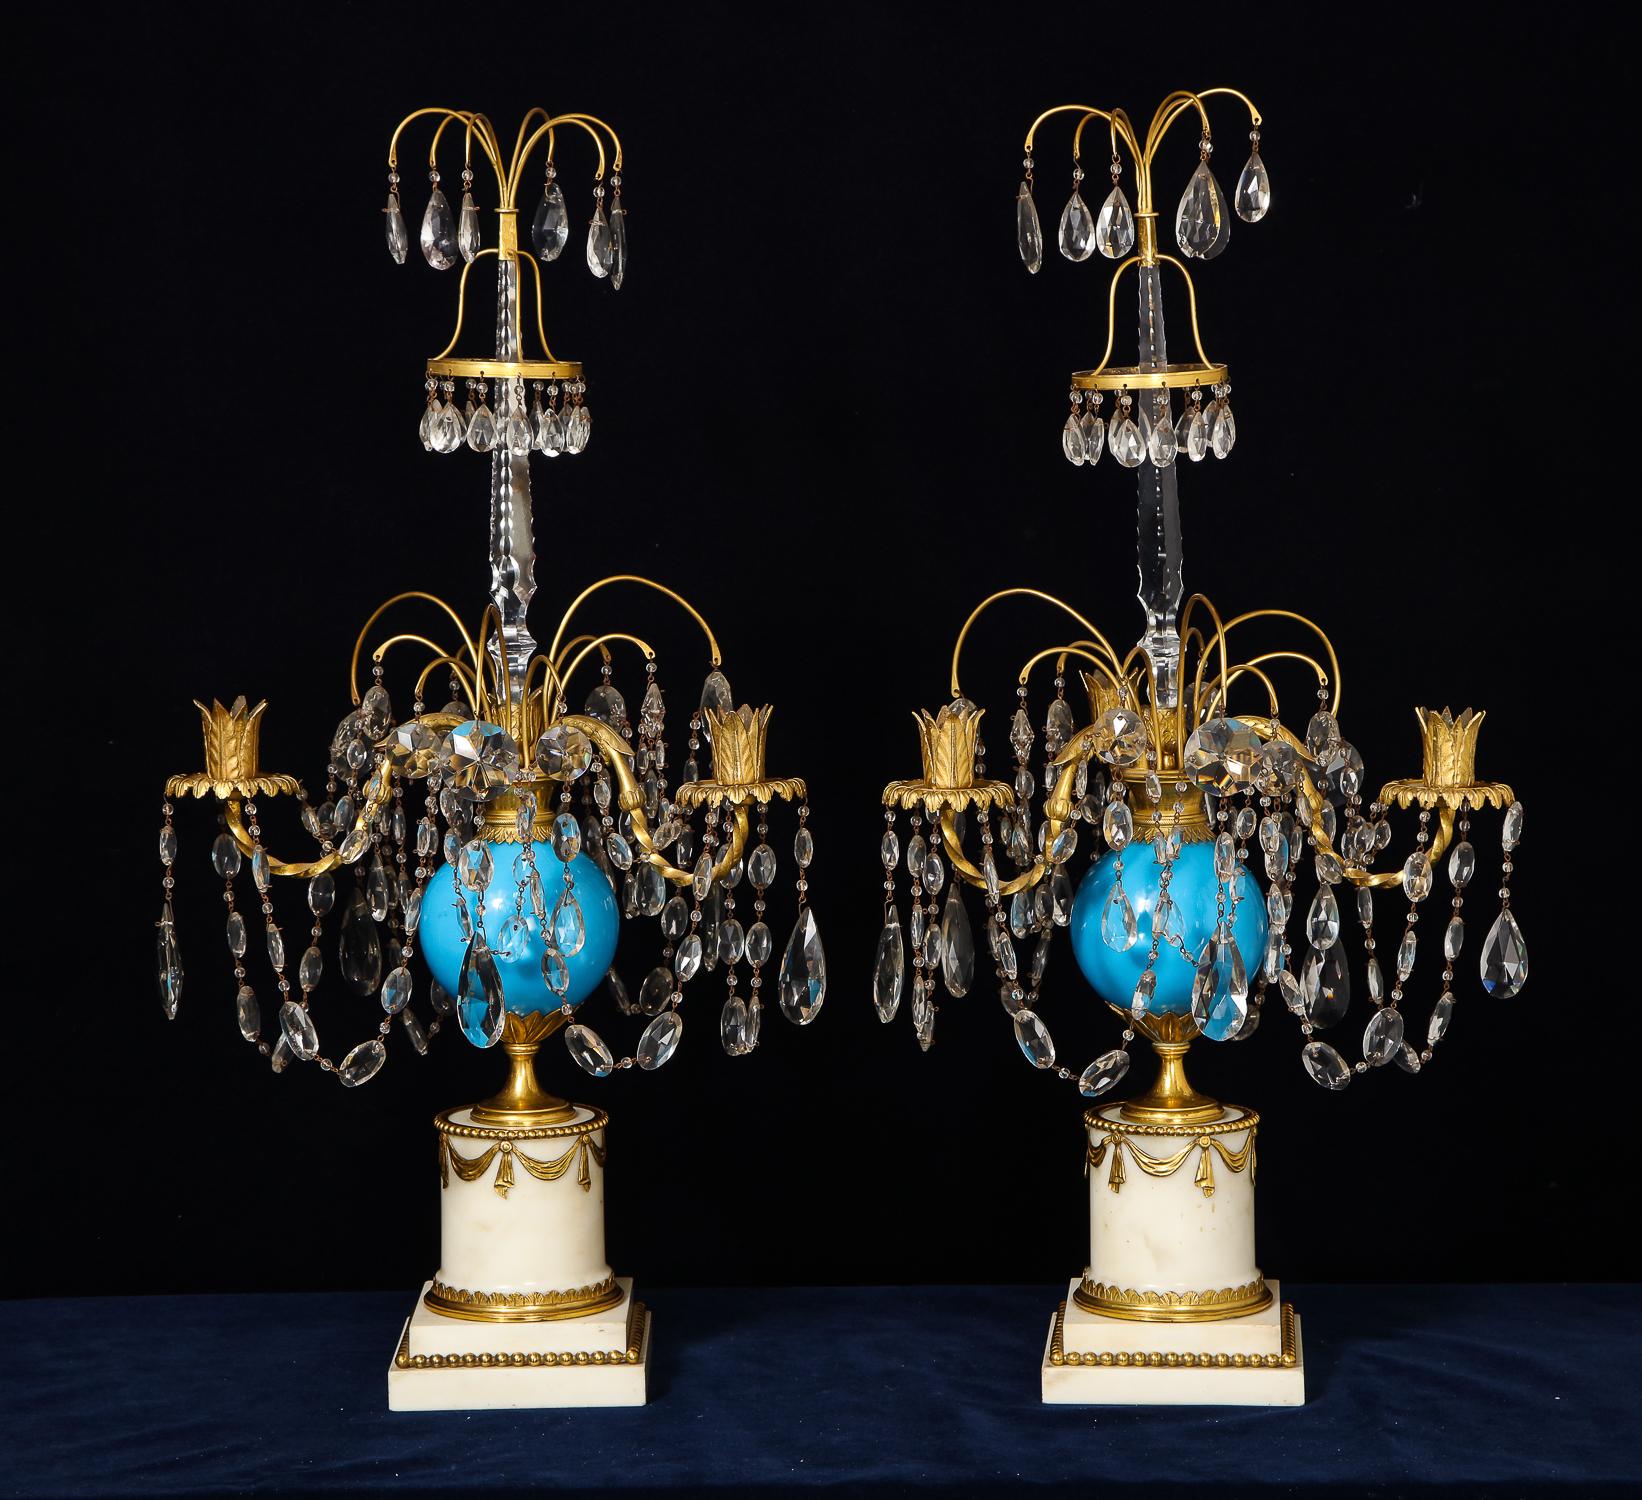 A pair of exquisite and highly important large antique Russian neoclassical gilt bronze, blue opaline glass, cut crystal and white marble candelabras of superb quality embellished with blue opaline glass, cut crystal chains, crystal prisms on gilt